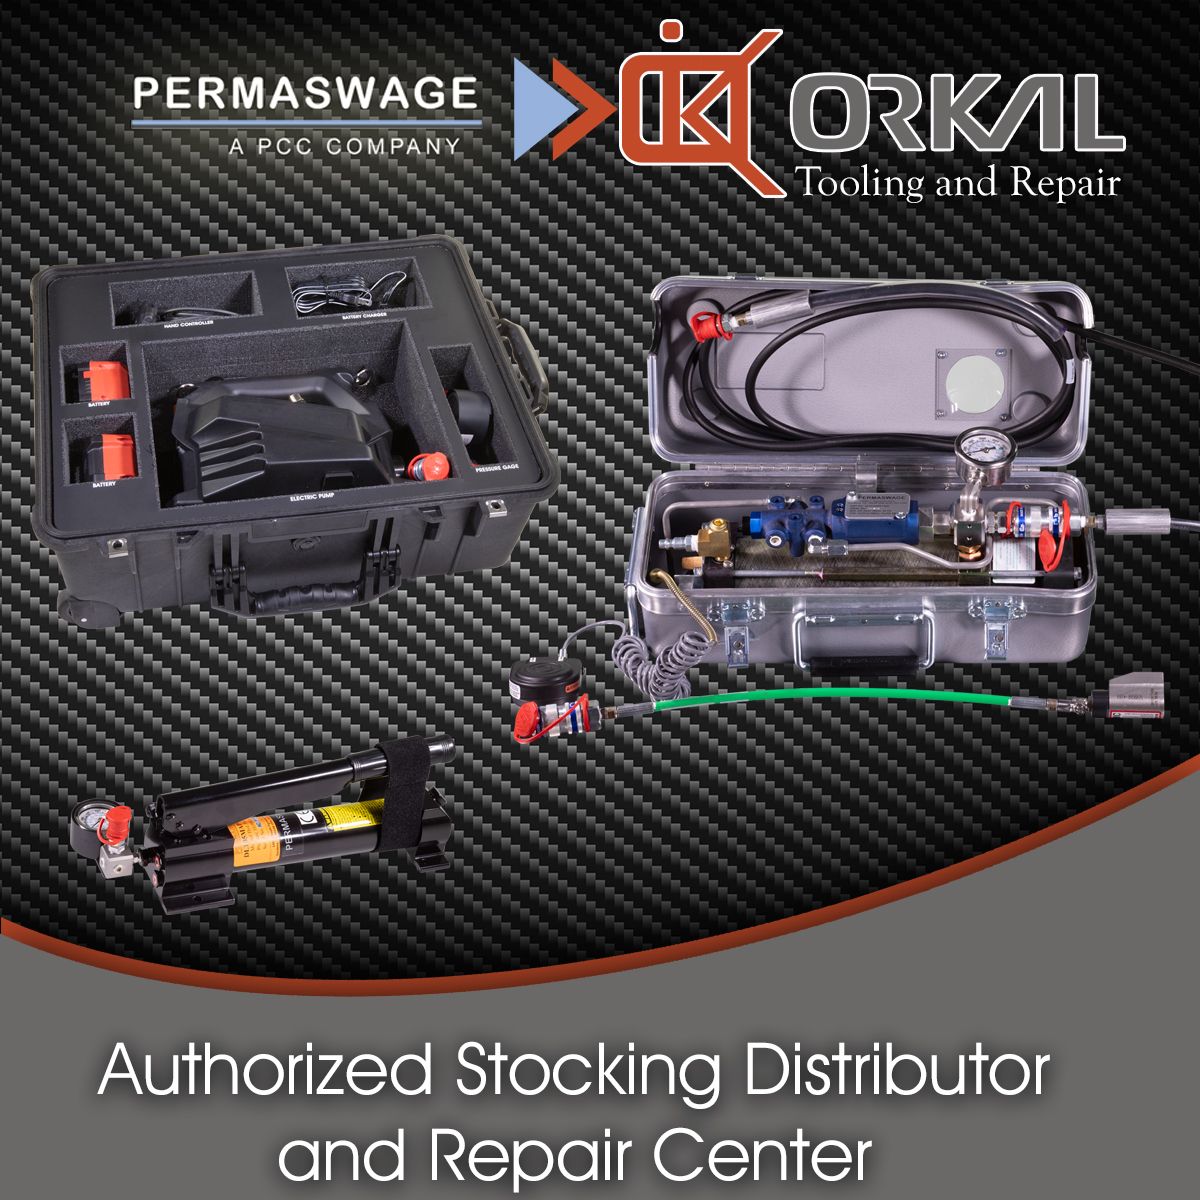 orkal, orkal industries: authorized distributor & repair center for aerospace quality tools and fluid transfer systems.

displaying top-grade kits, machinery, fittings, and auto-draft systems for aviation excellence.

comprehensive tooling, repair services, and assembly solutions with strict compliance to industry standards. 

trusted in supply chain logistics and aircraft-grade fluid transfer systems.